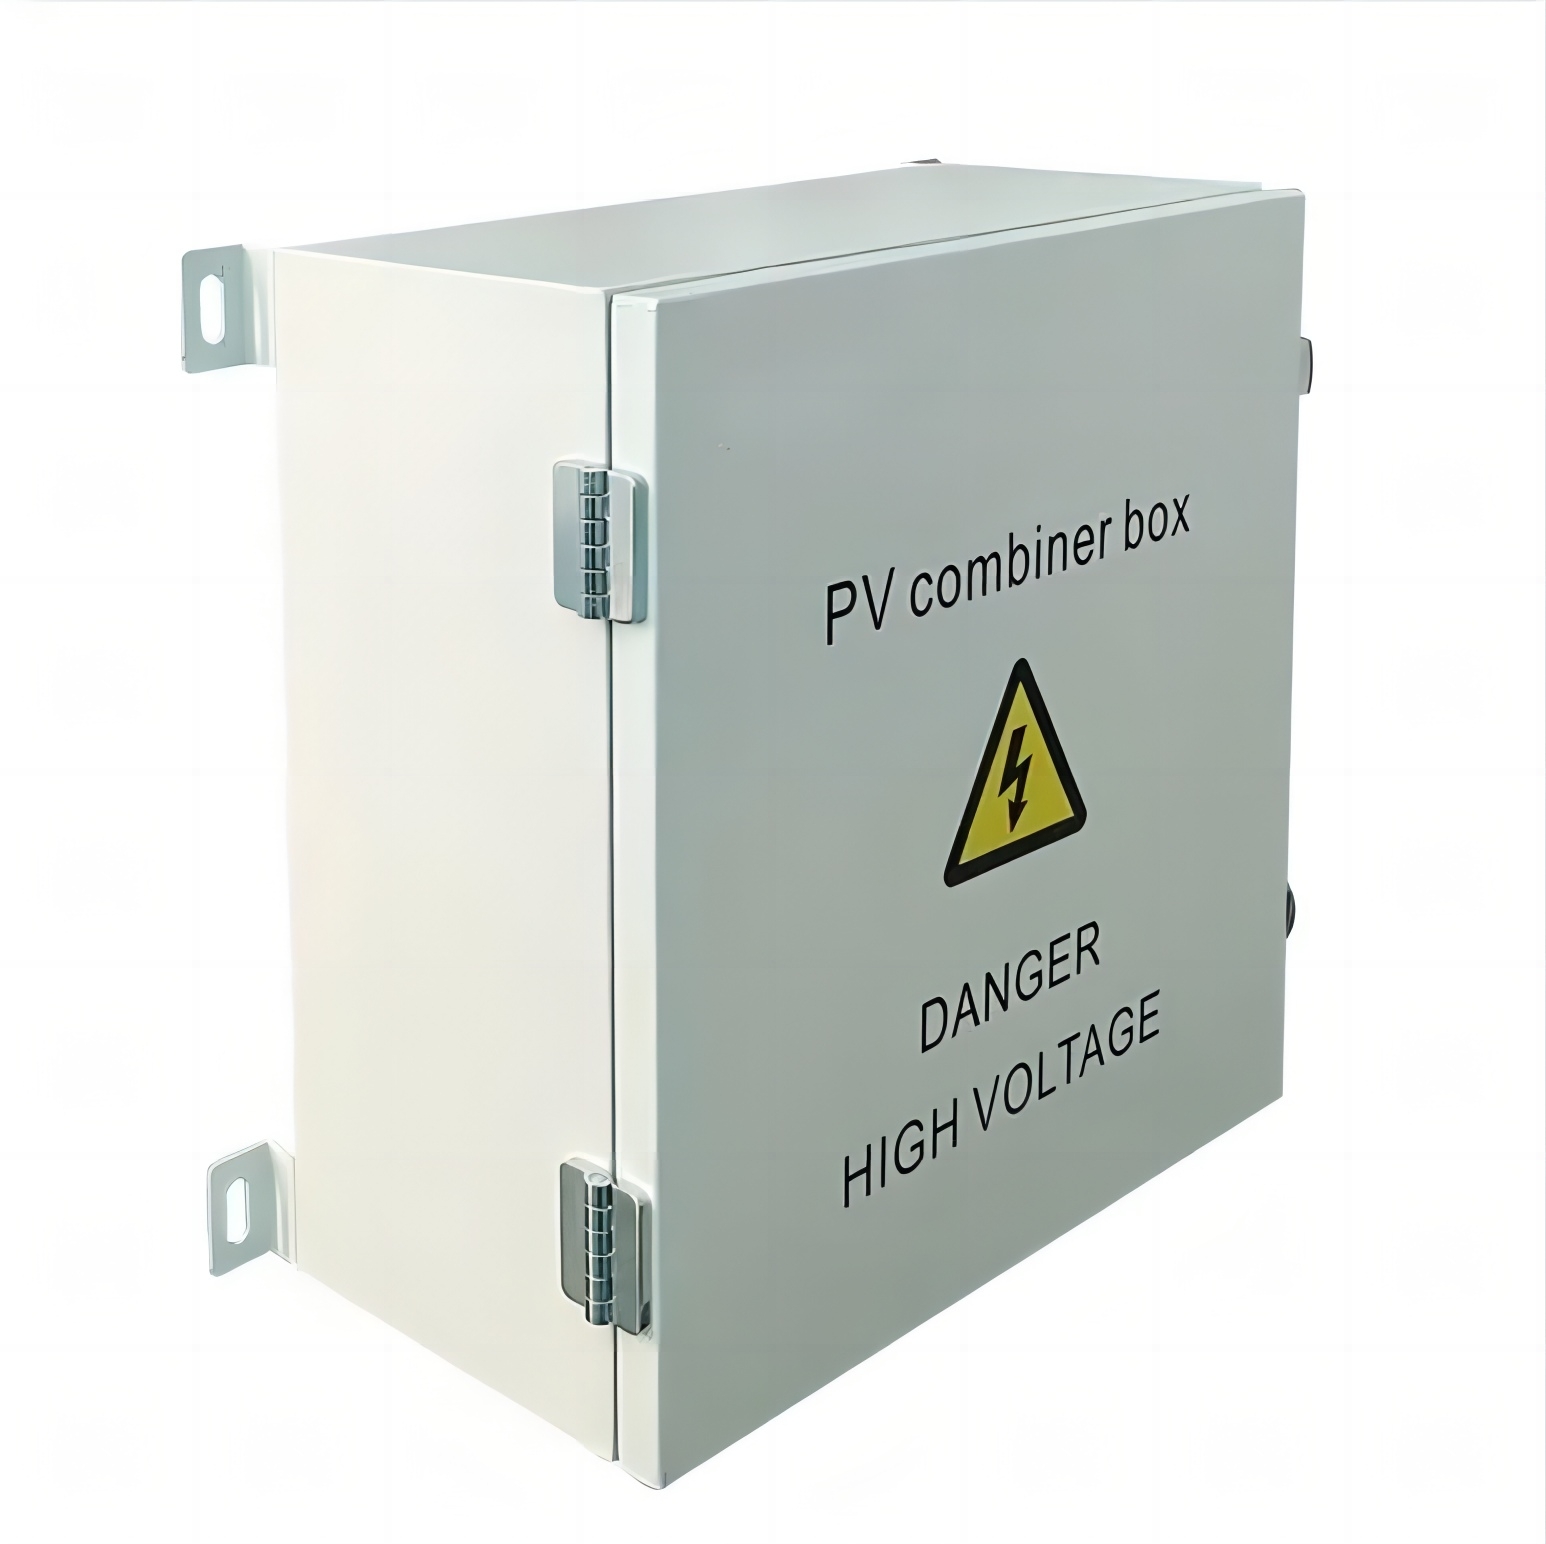 PV grid connection box